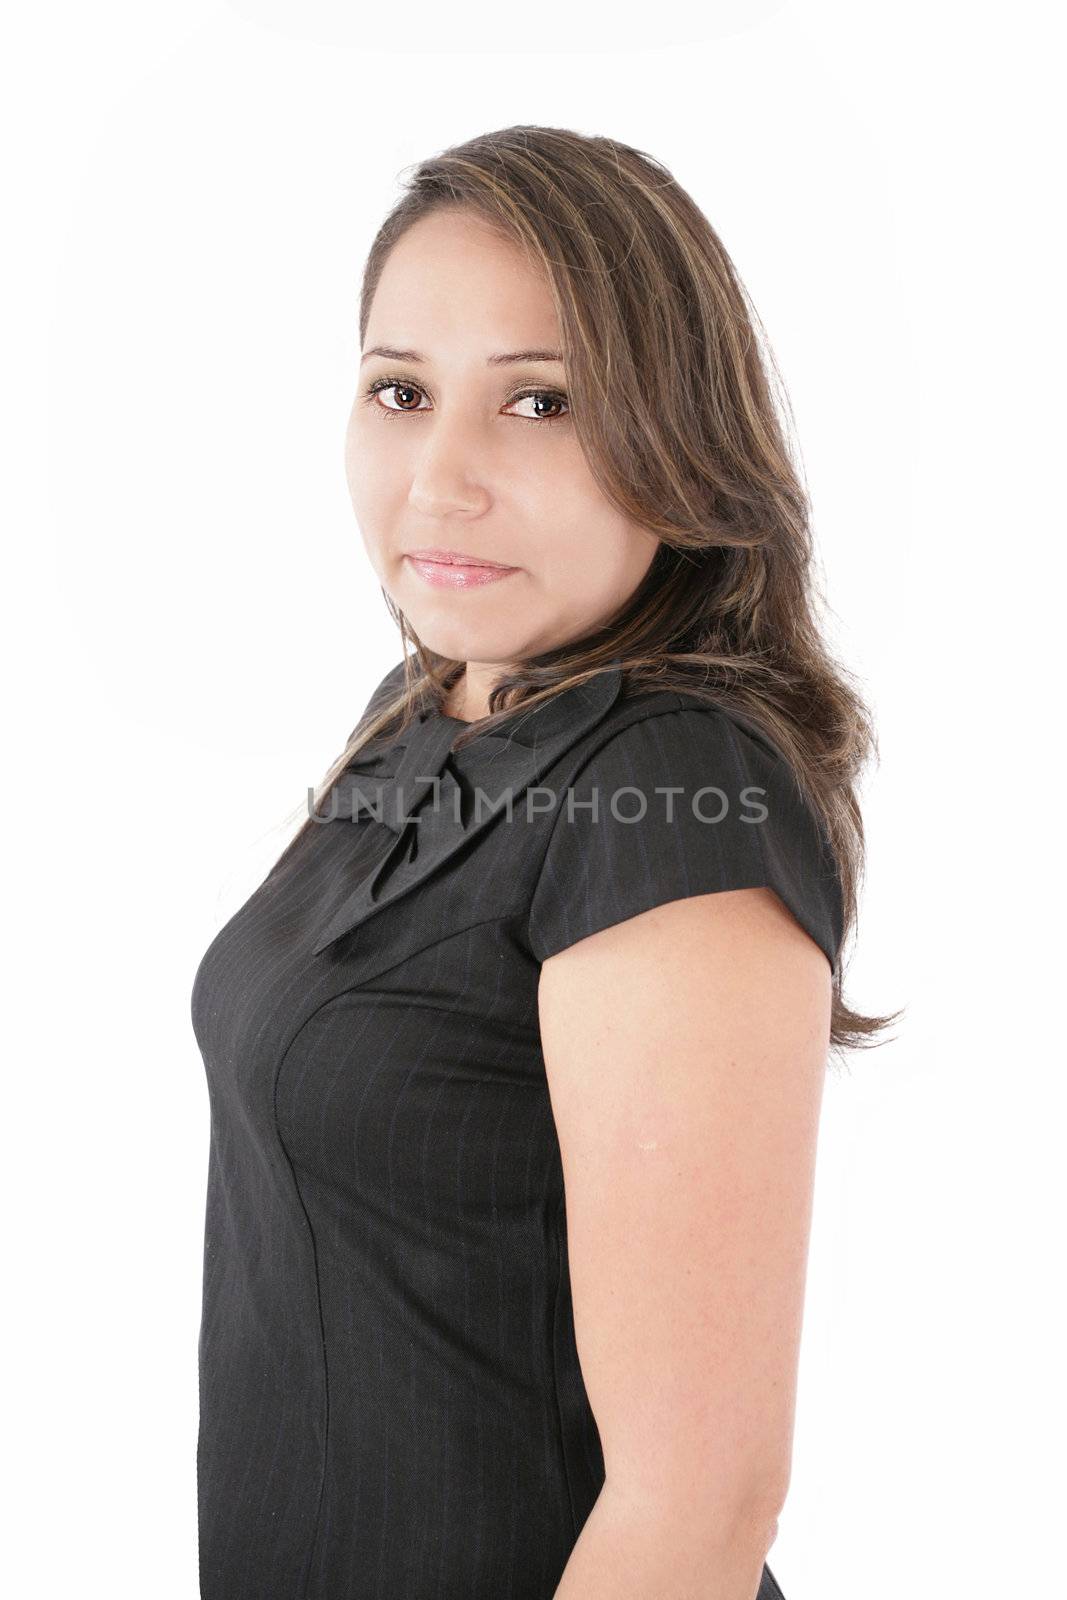 Portrait of a happy middle aged woman smiling against white background